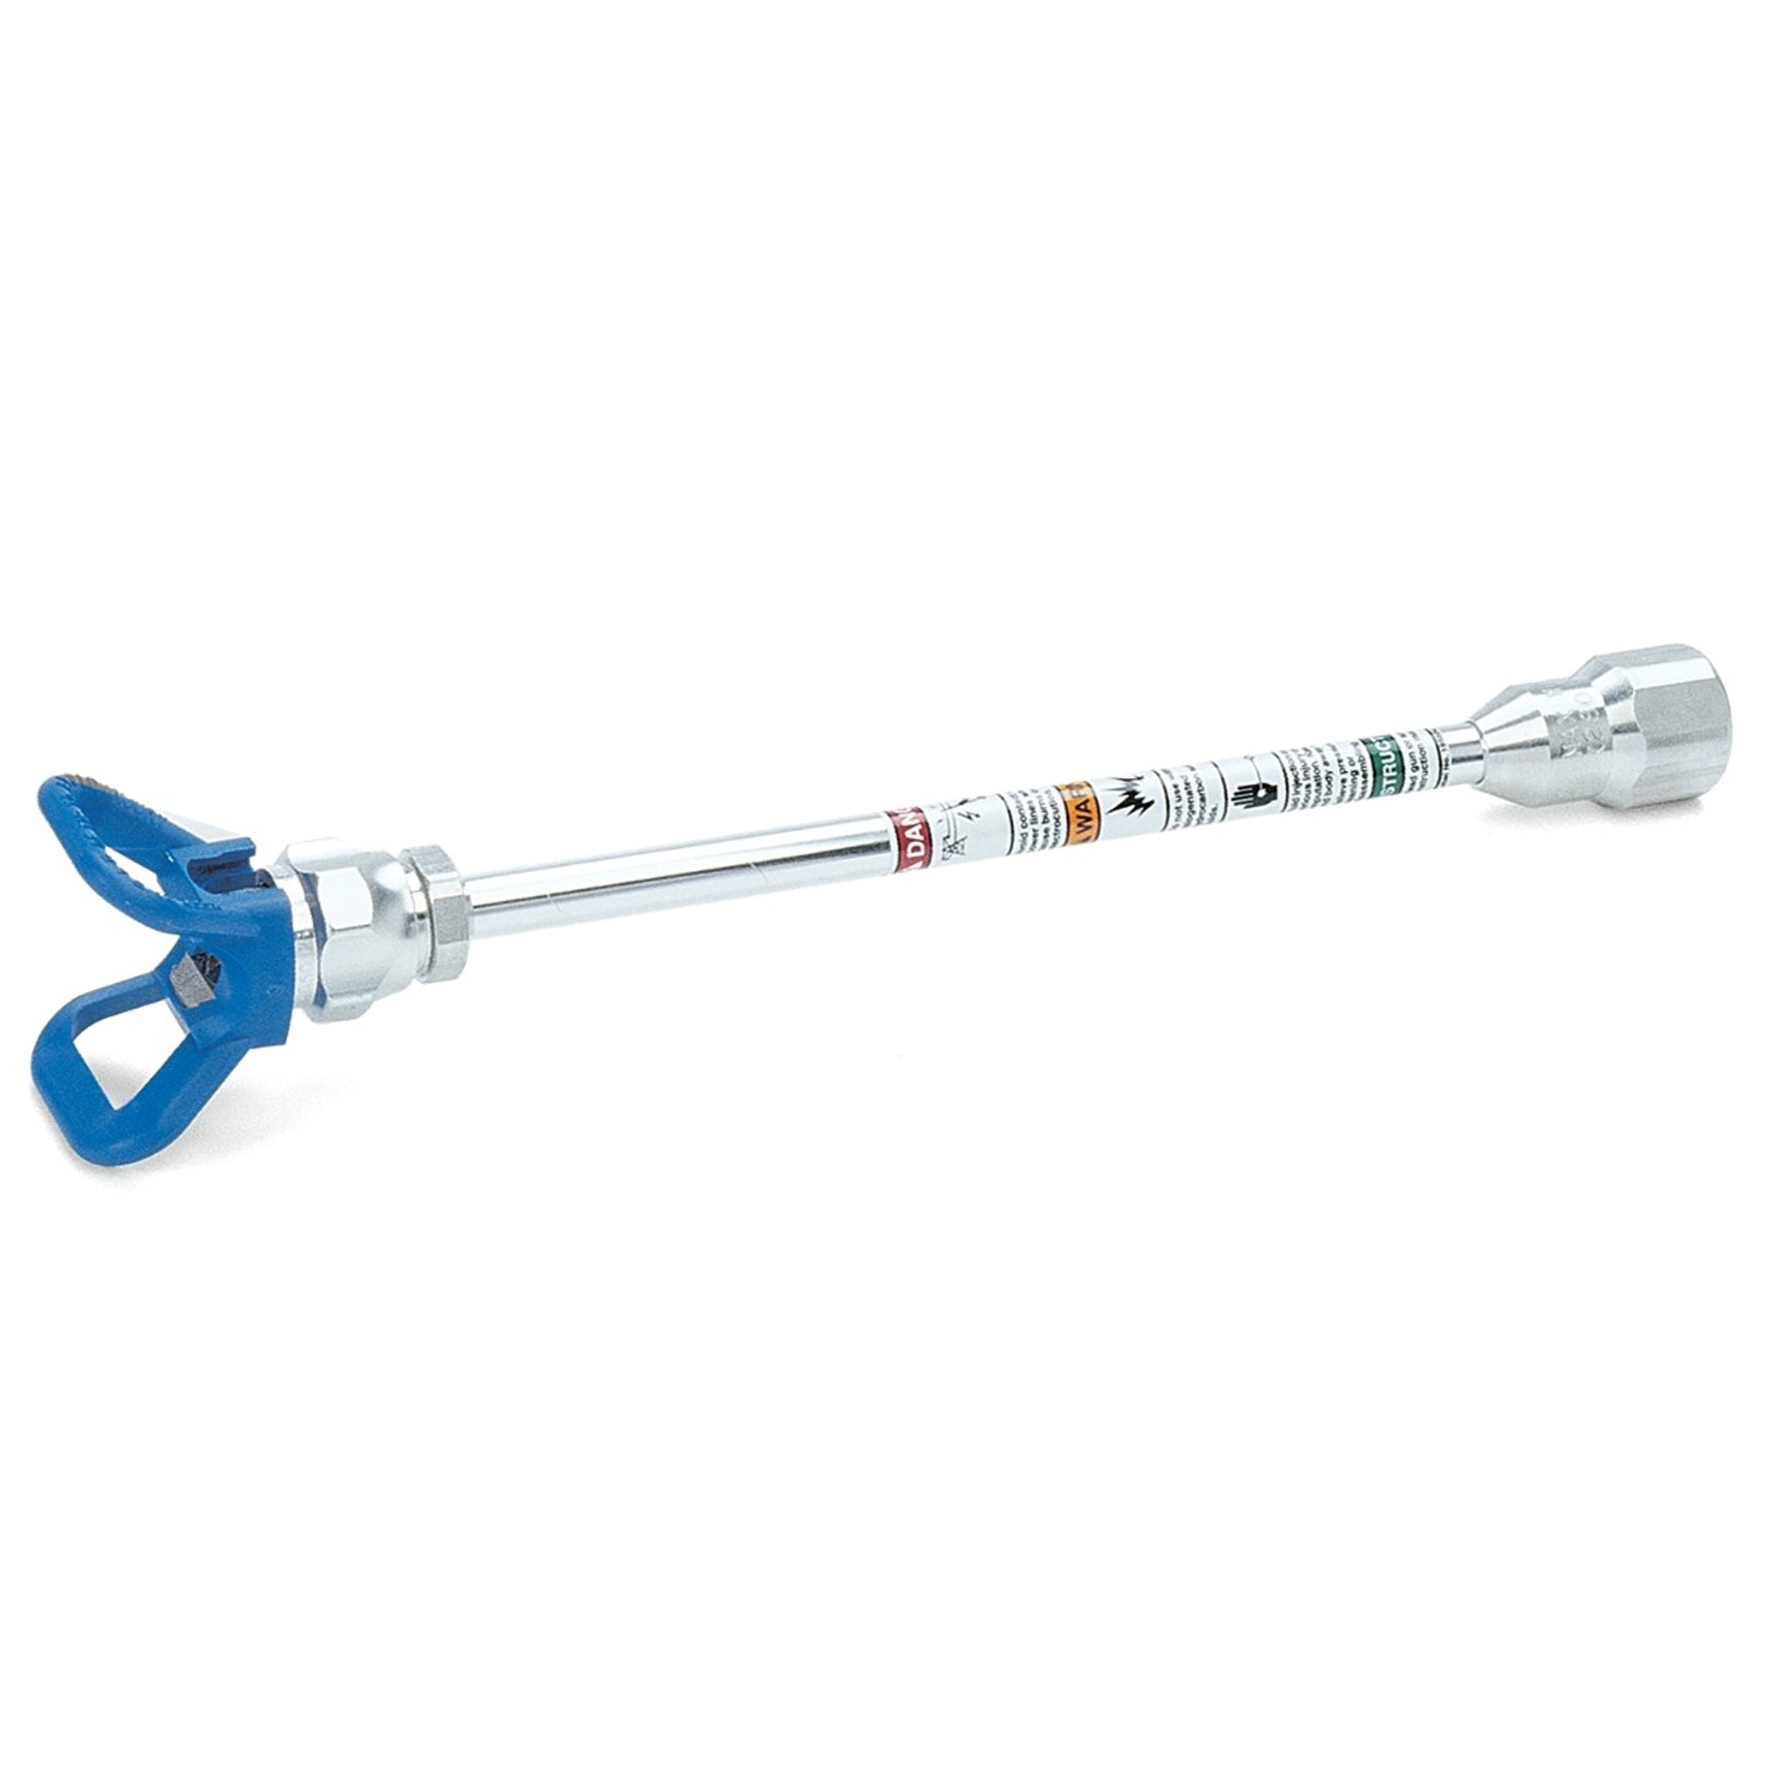 287019 GRACO 25 CM TIP EXTENSION WITH RAC X GUARD